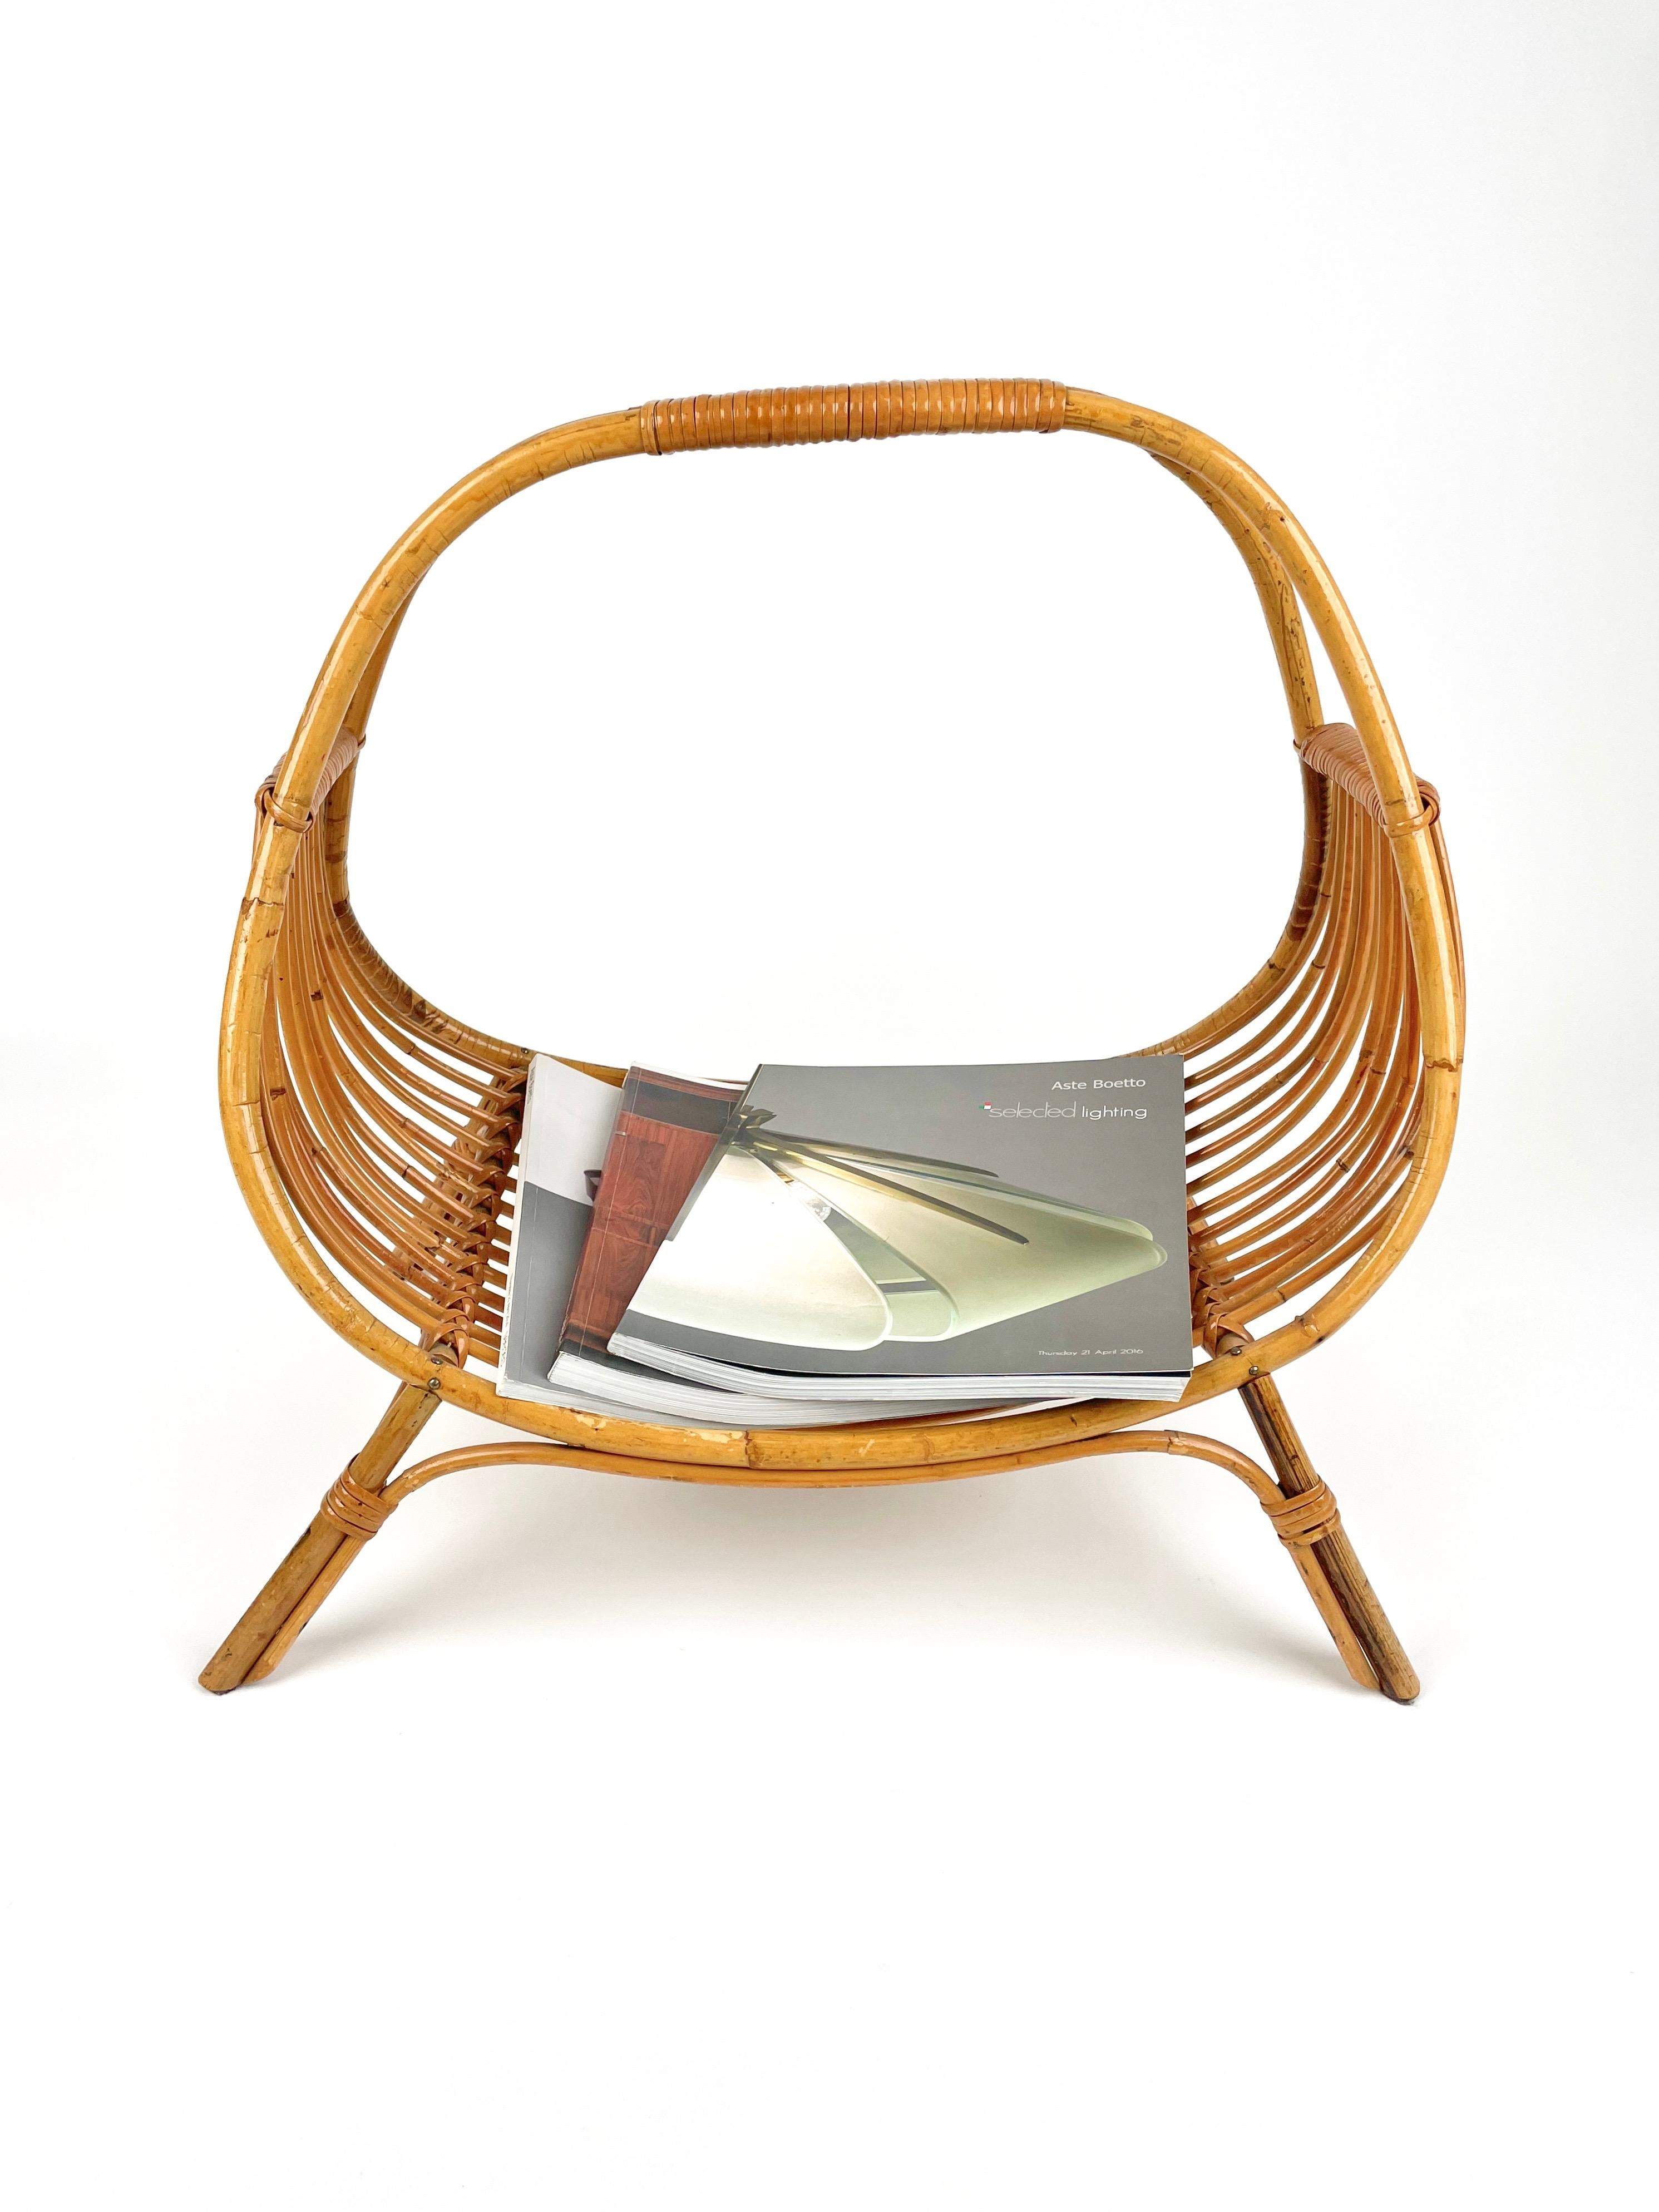 Midcentury Rattan & Bamboo Curved Magazine Rack, Italy 1960s For Sale 3